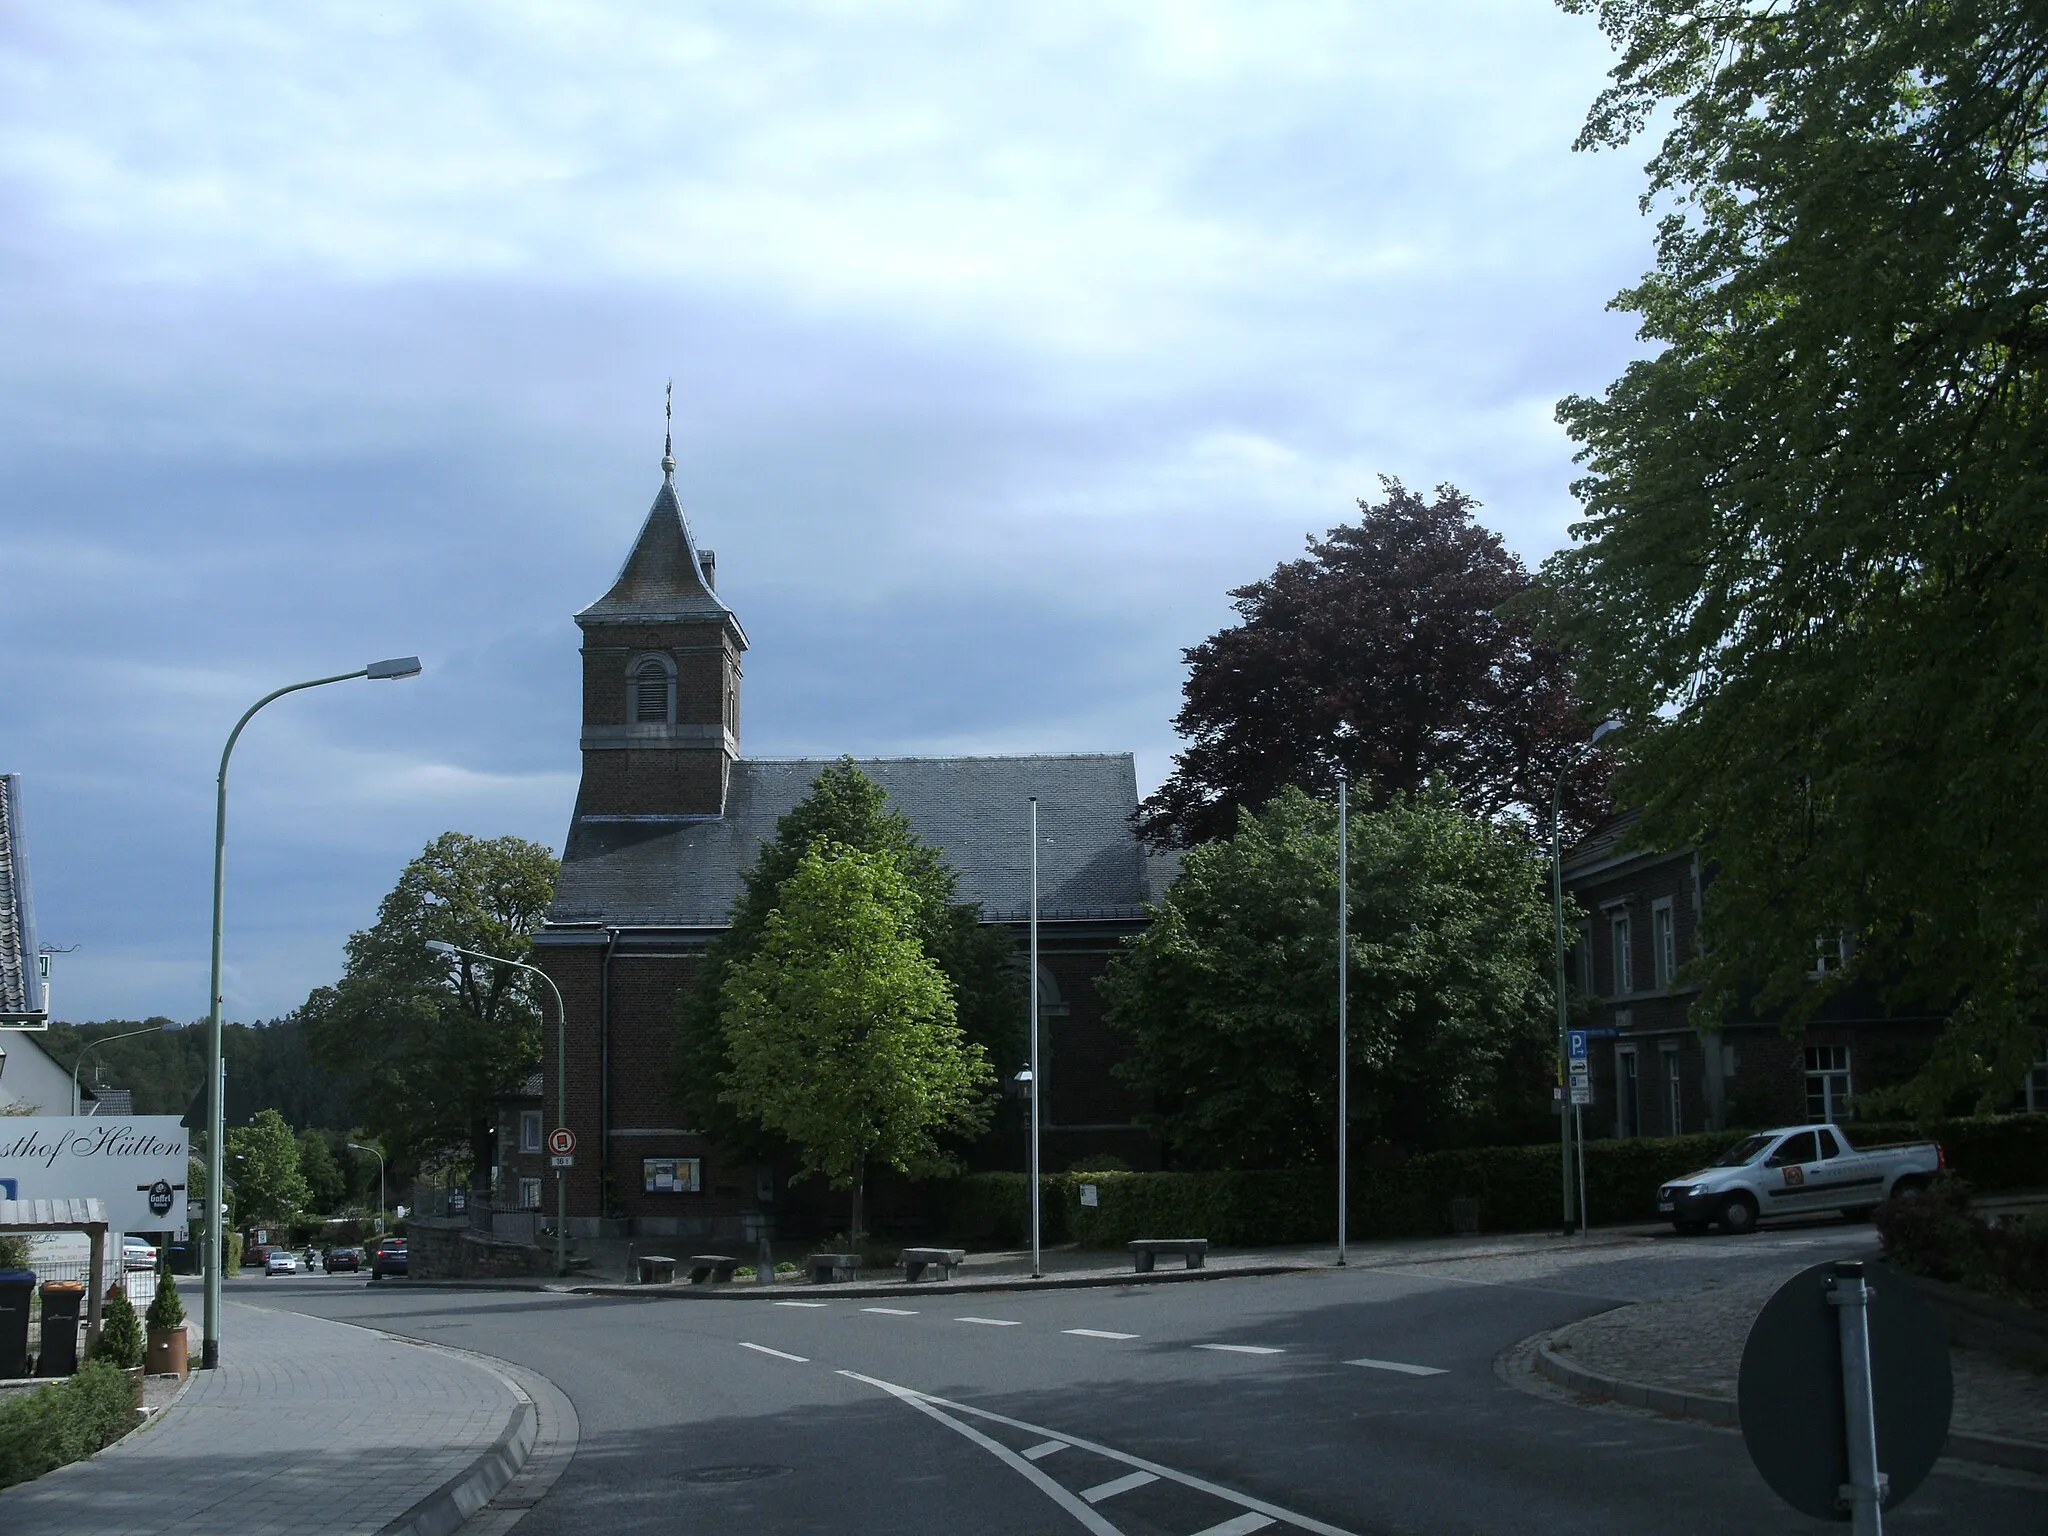 Photo showing: The church of Rott, a suburb of Roetgen, Germany